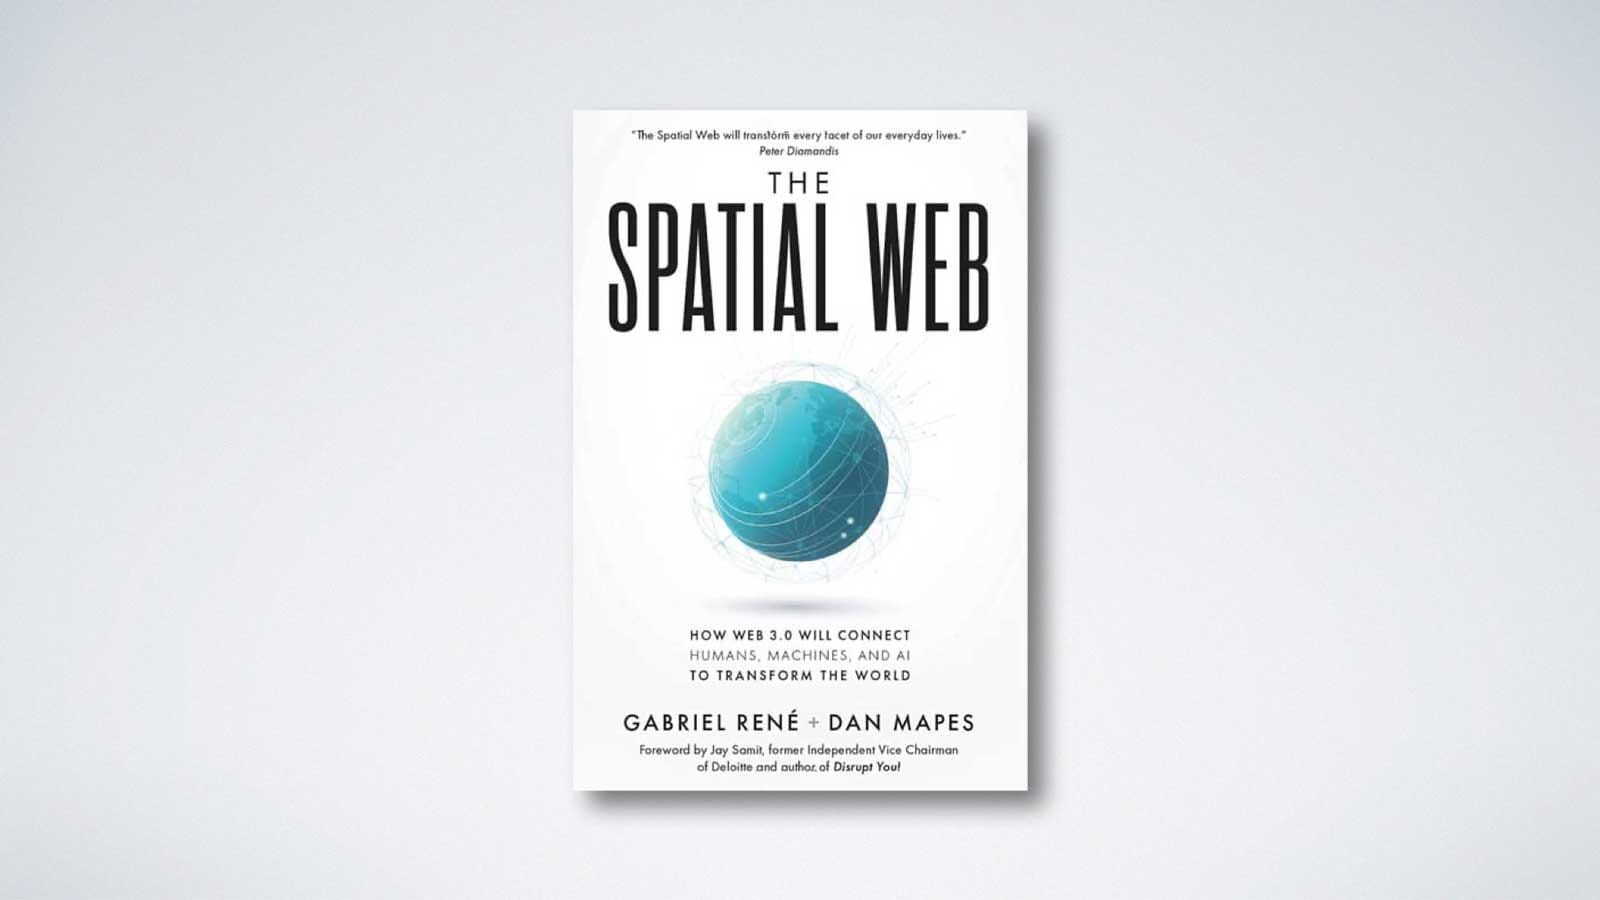 The Spatial Web